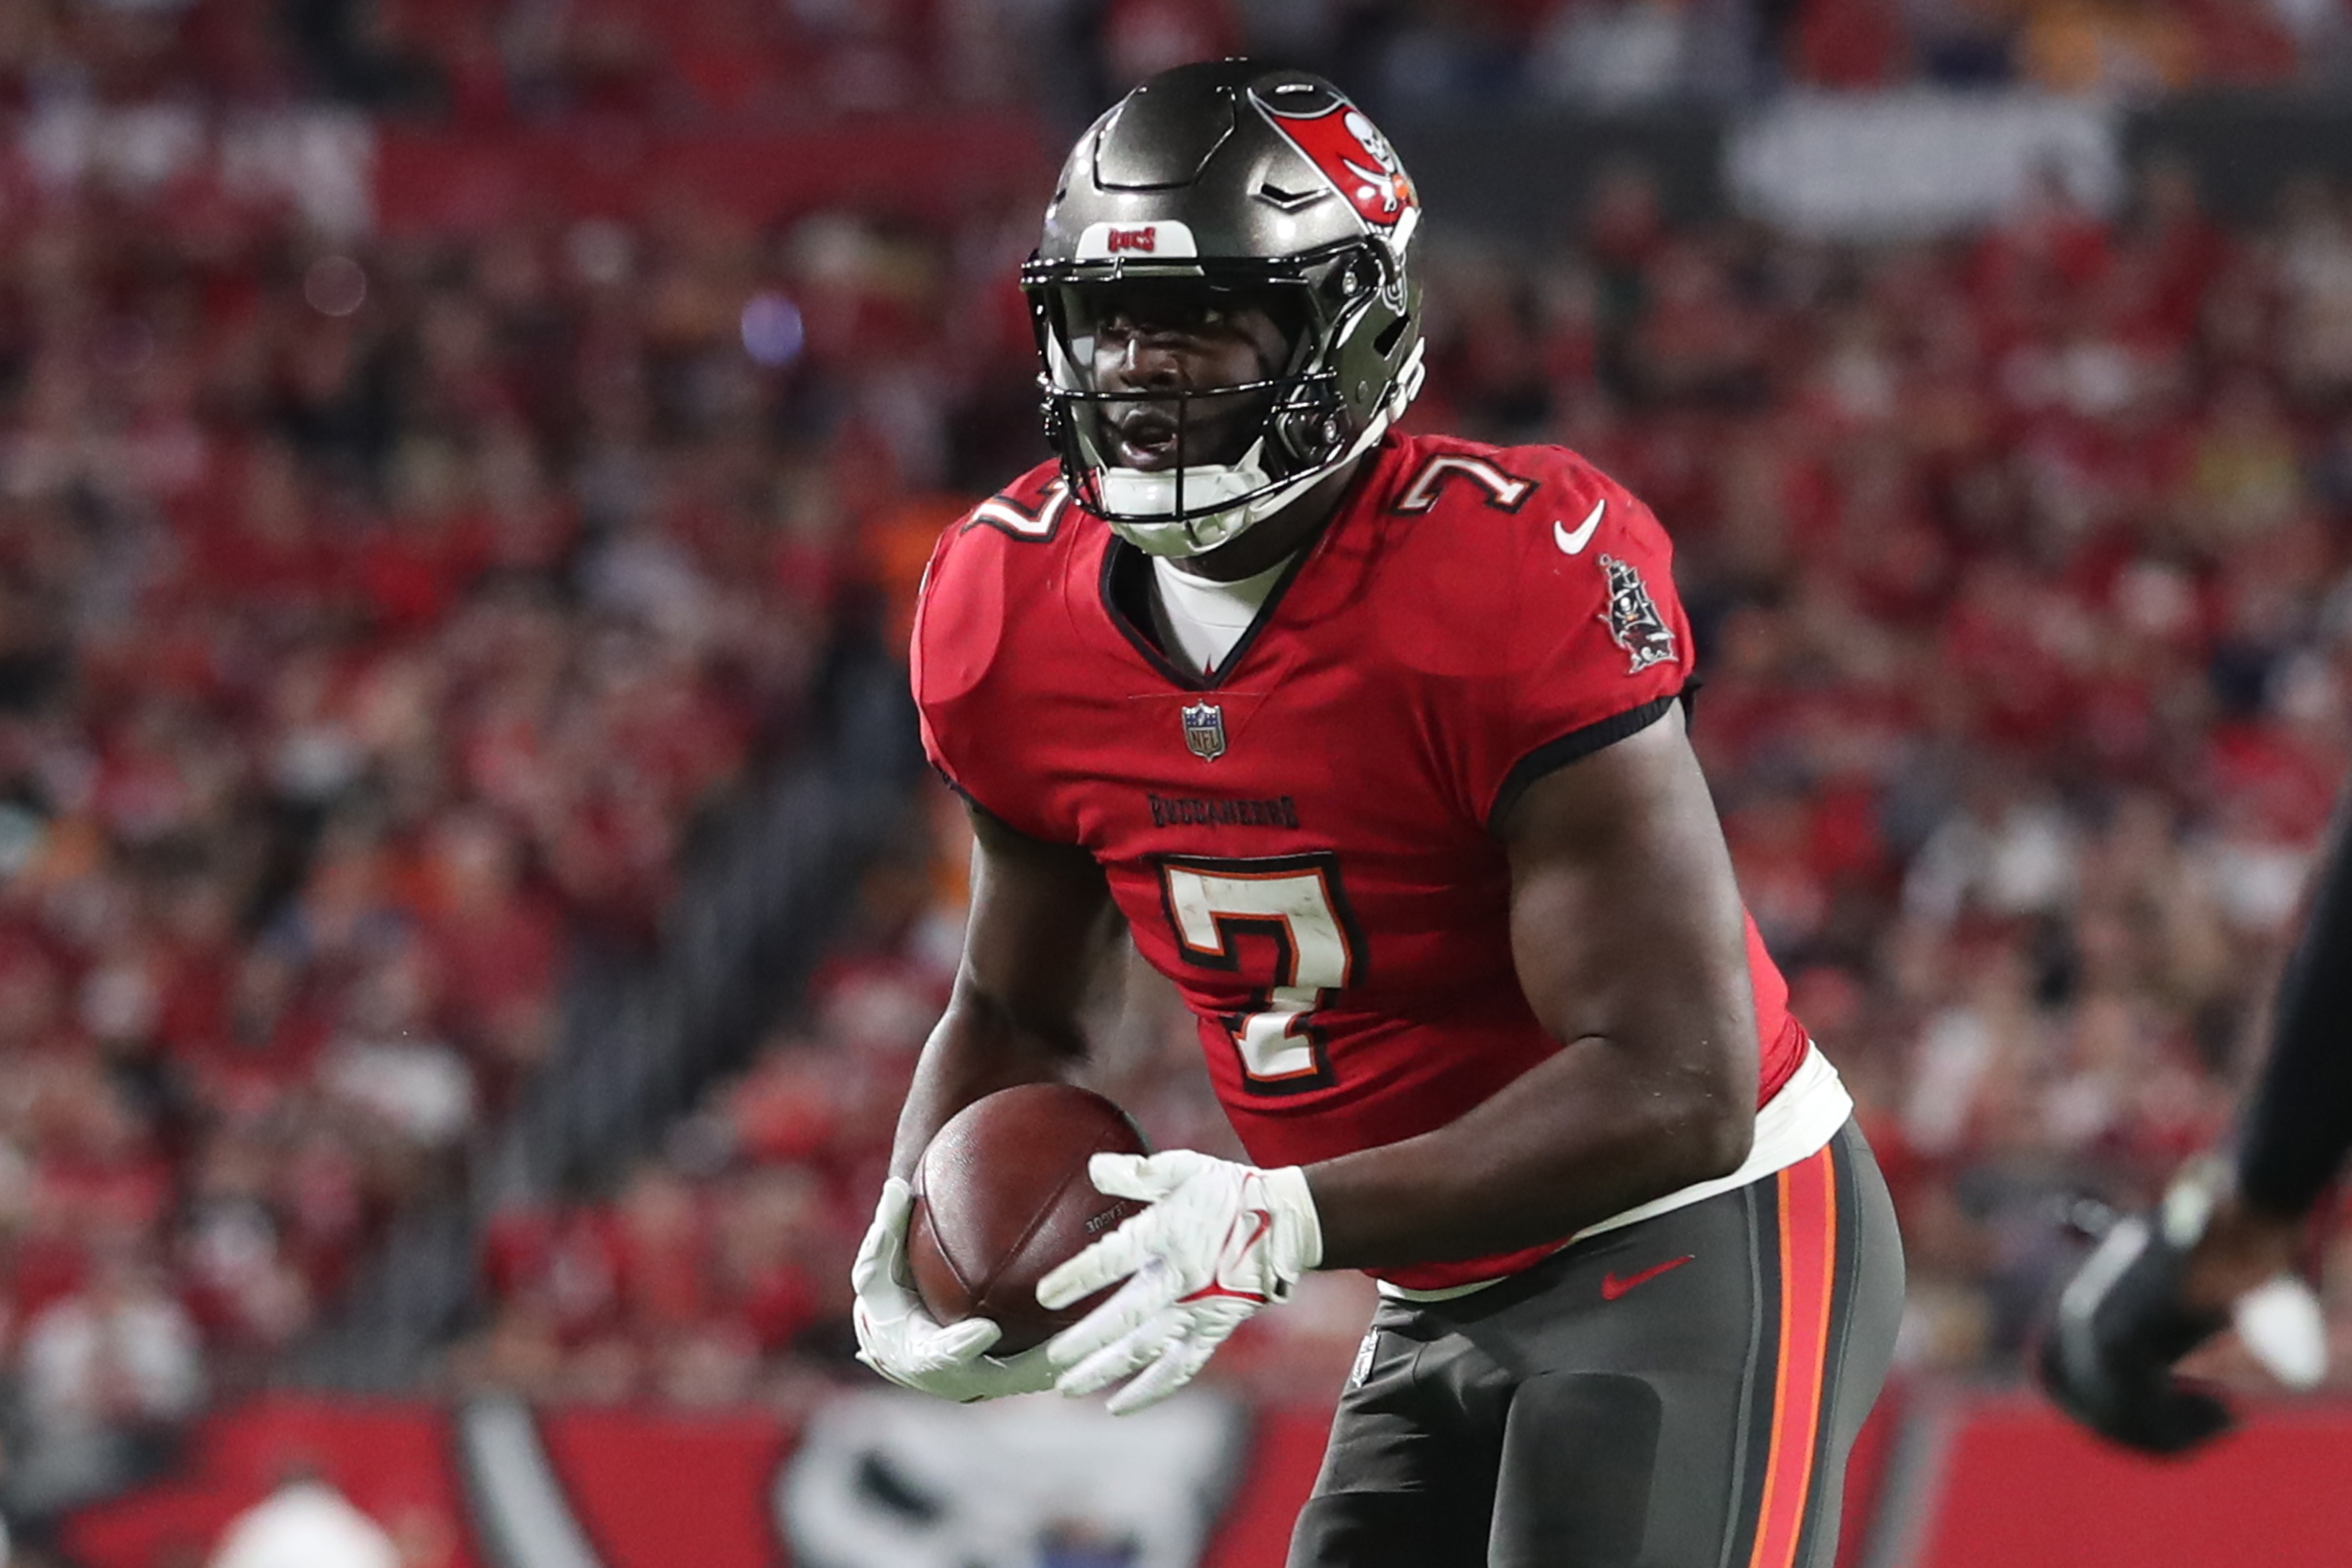 Tampa Bay Buccaneers Running Back Leonard Fournette (7) carries the ball during the regular season game between the New Orleans Saints and the Tampa Bay Buccaneers on December 05, 2022 at Raymond James Stadium in Tampa, Florida.